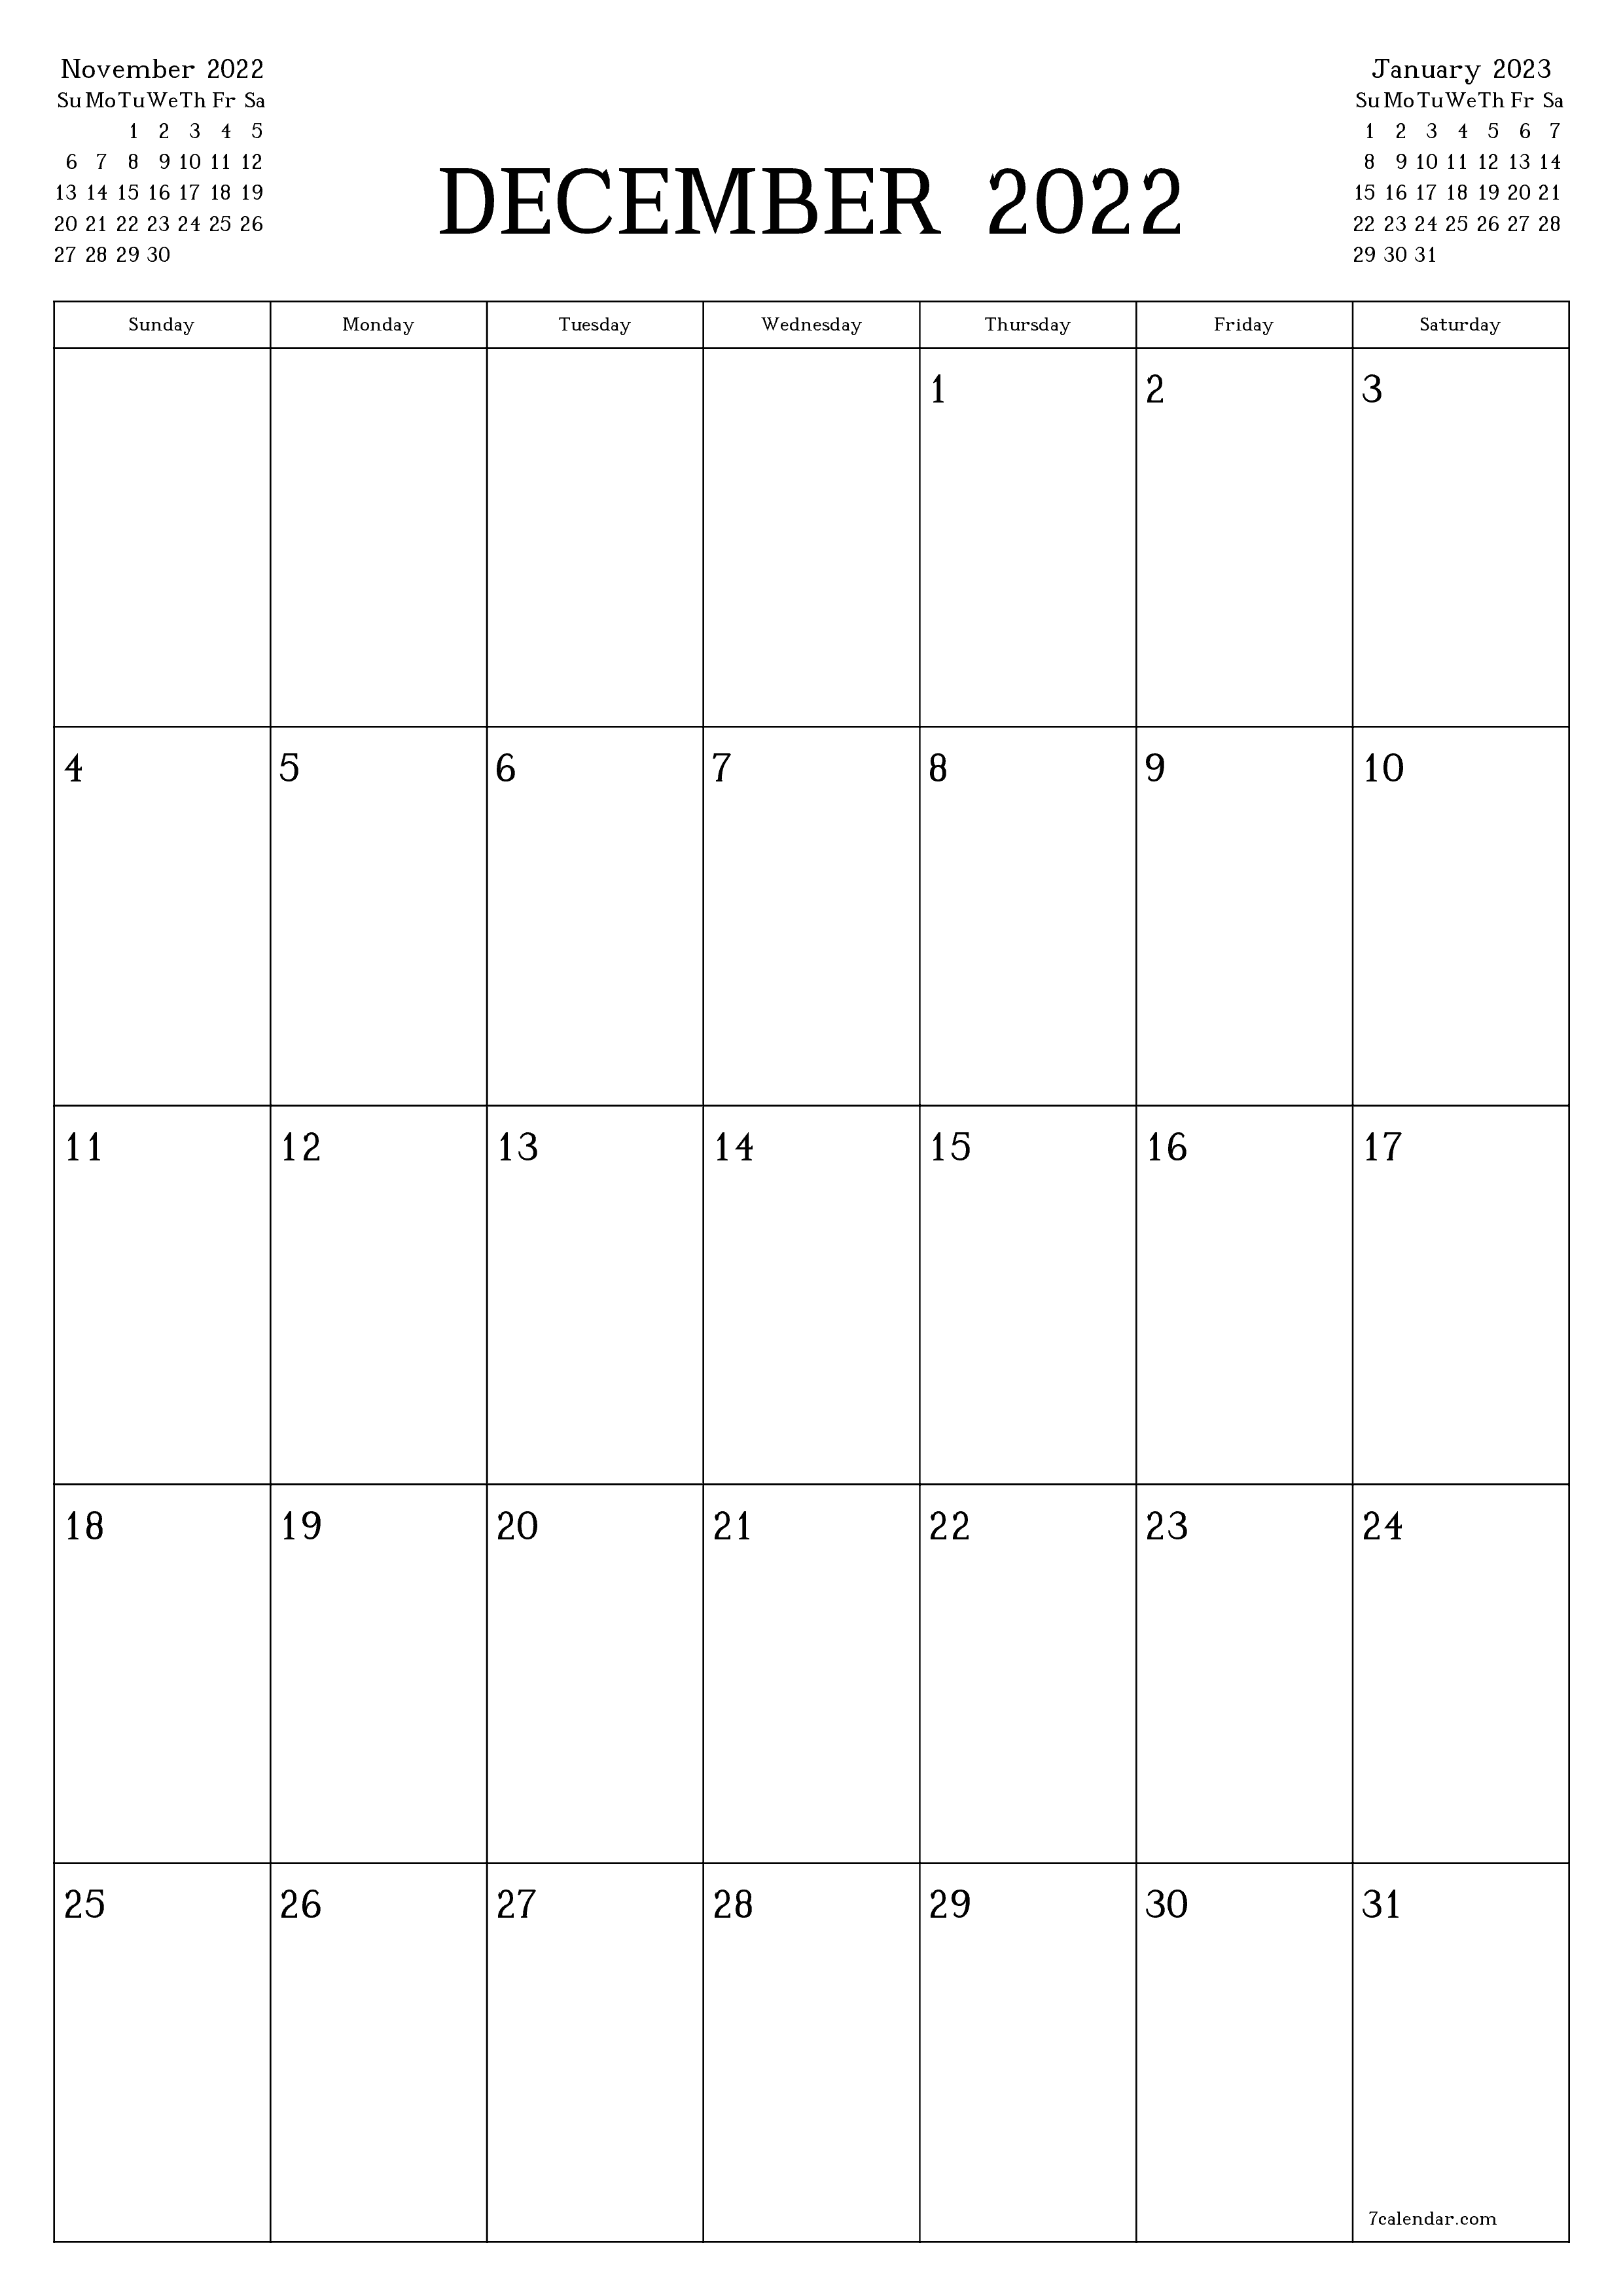 Blank monthly calendar planner for month December 2022 with notes save and print to PDF PNG English - 7calendar.com